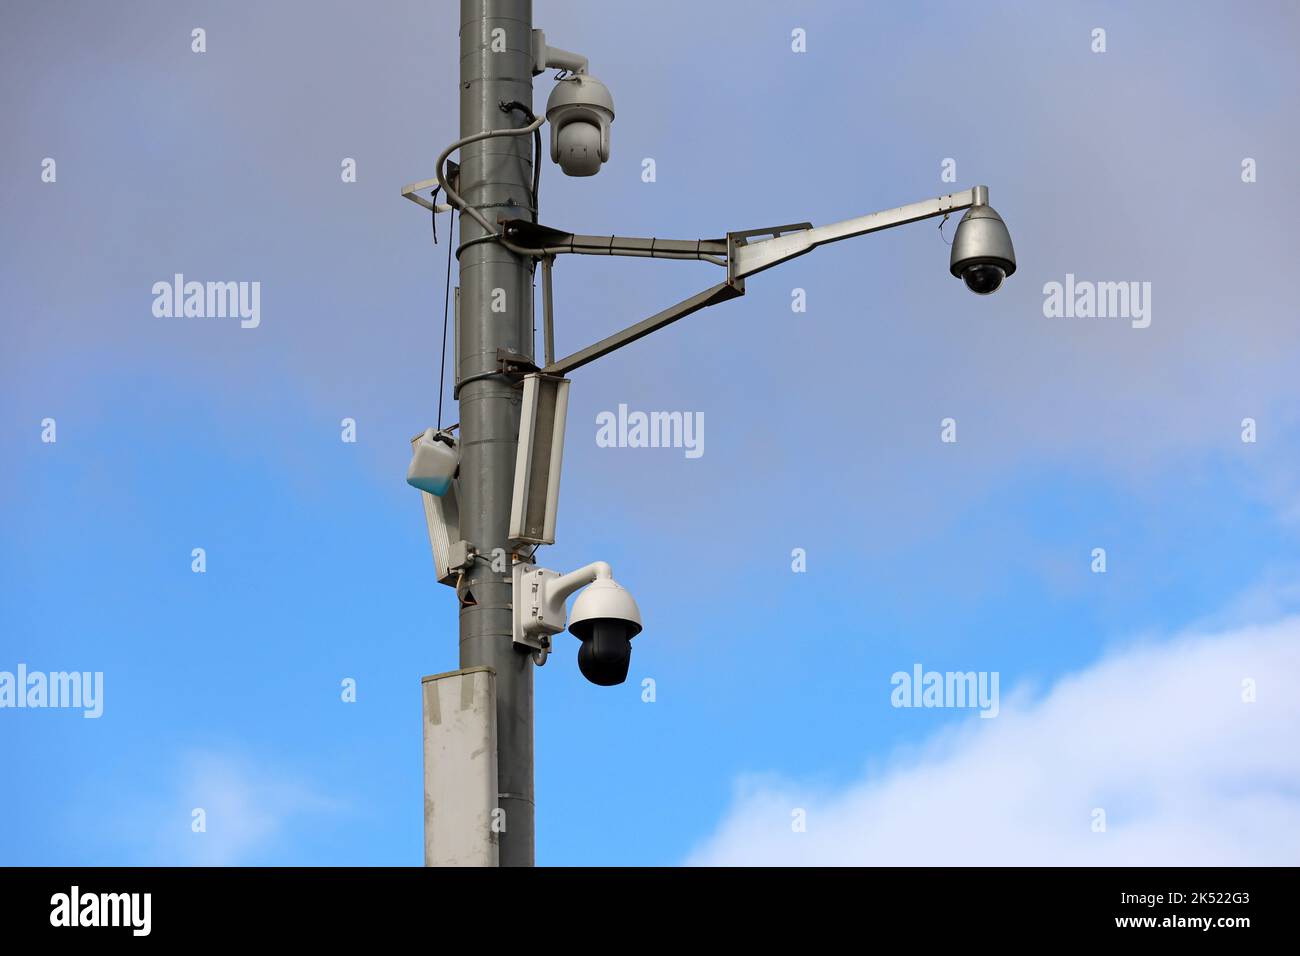 Outdoor surveillance video cameras on a street pole in blue sky. Cctv camera, concept for security, privacy and protection from crime Stock Photo